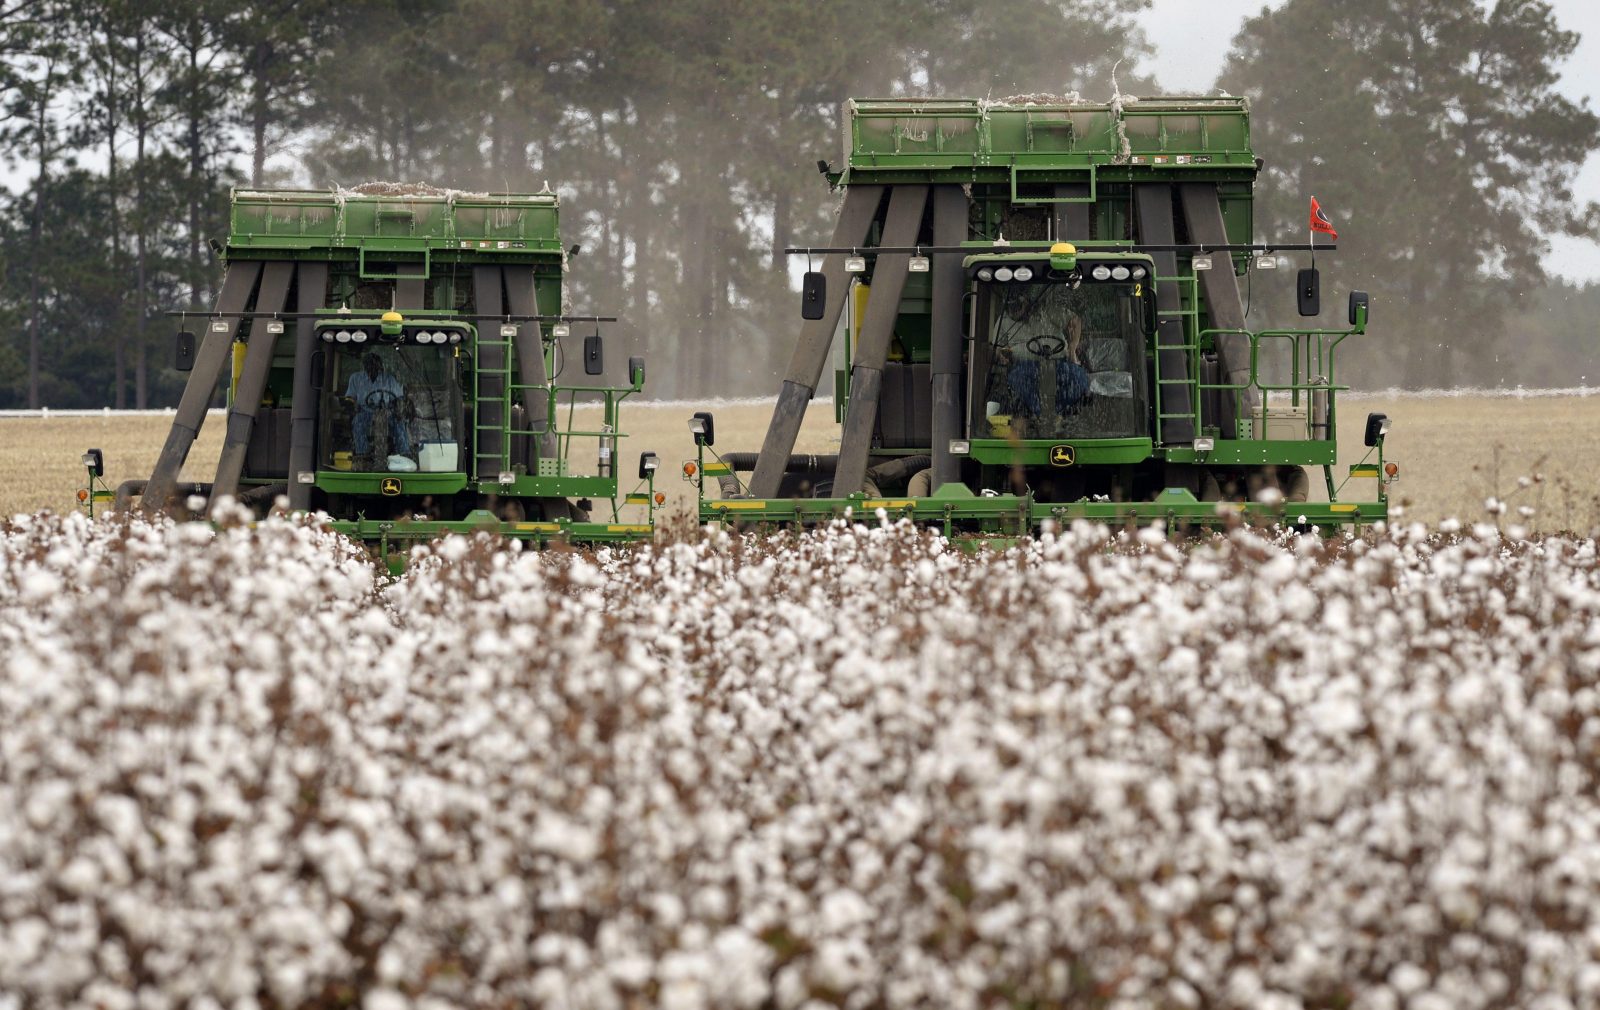 Mechanical cotton harvesters in action